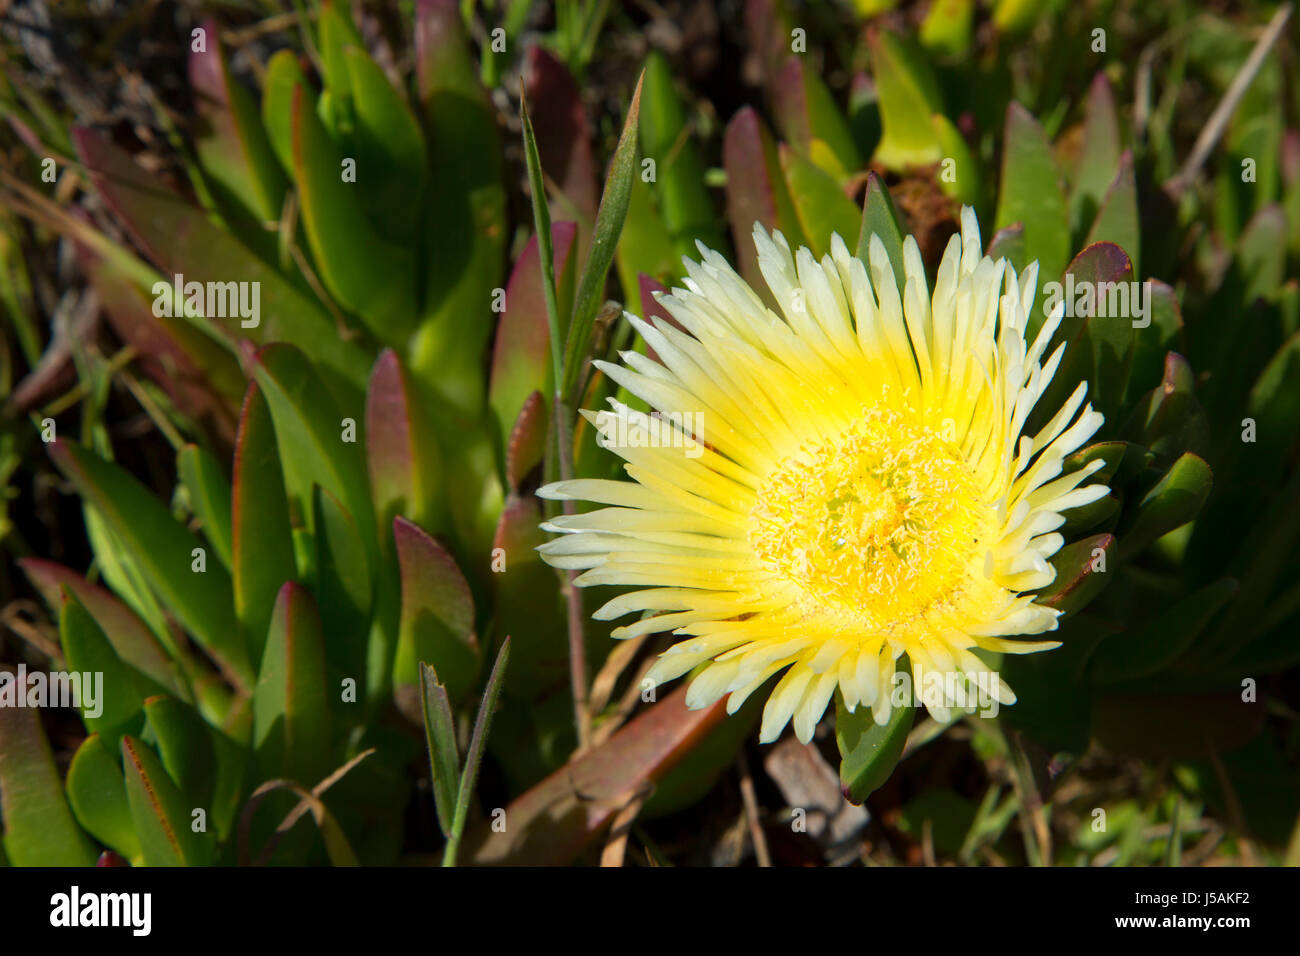 Ice plant in bloom, Fort Ord Dunes State Park, Seaside, California Stock Photo